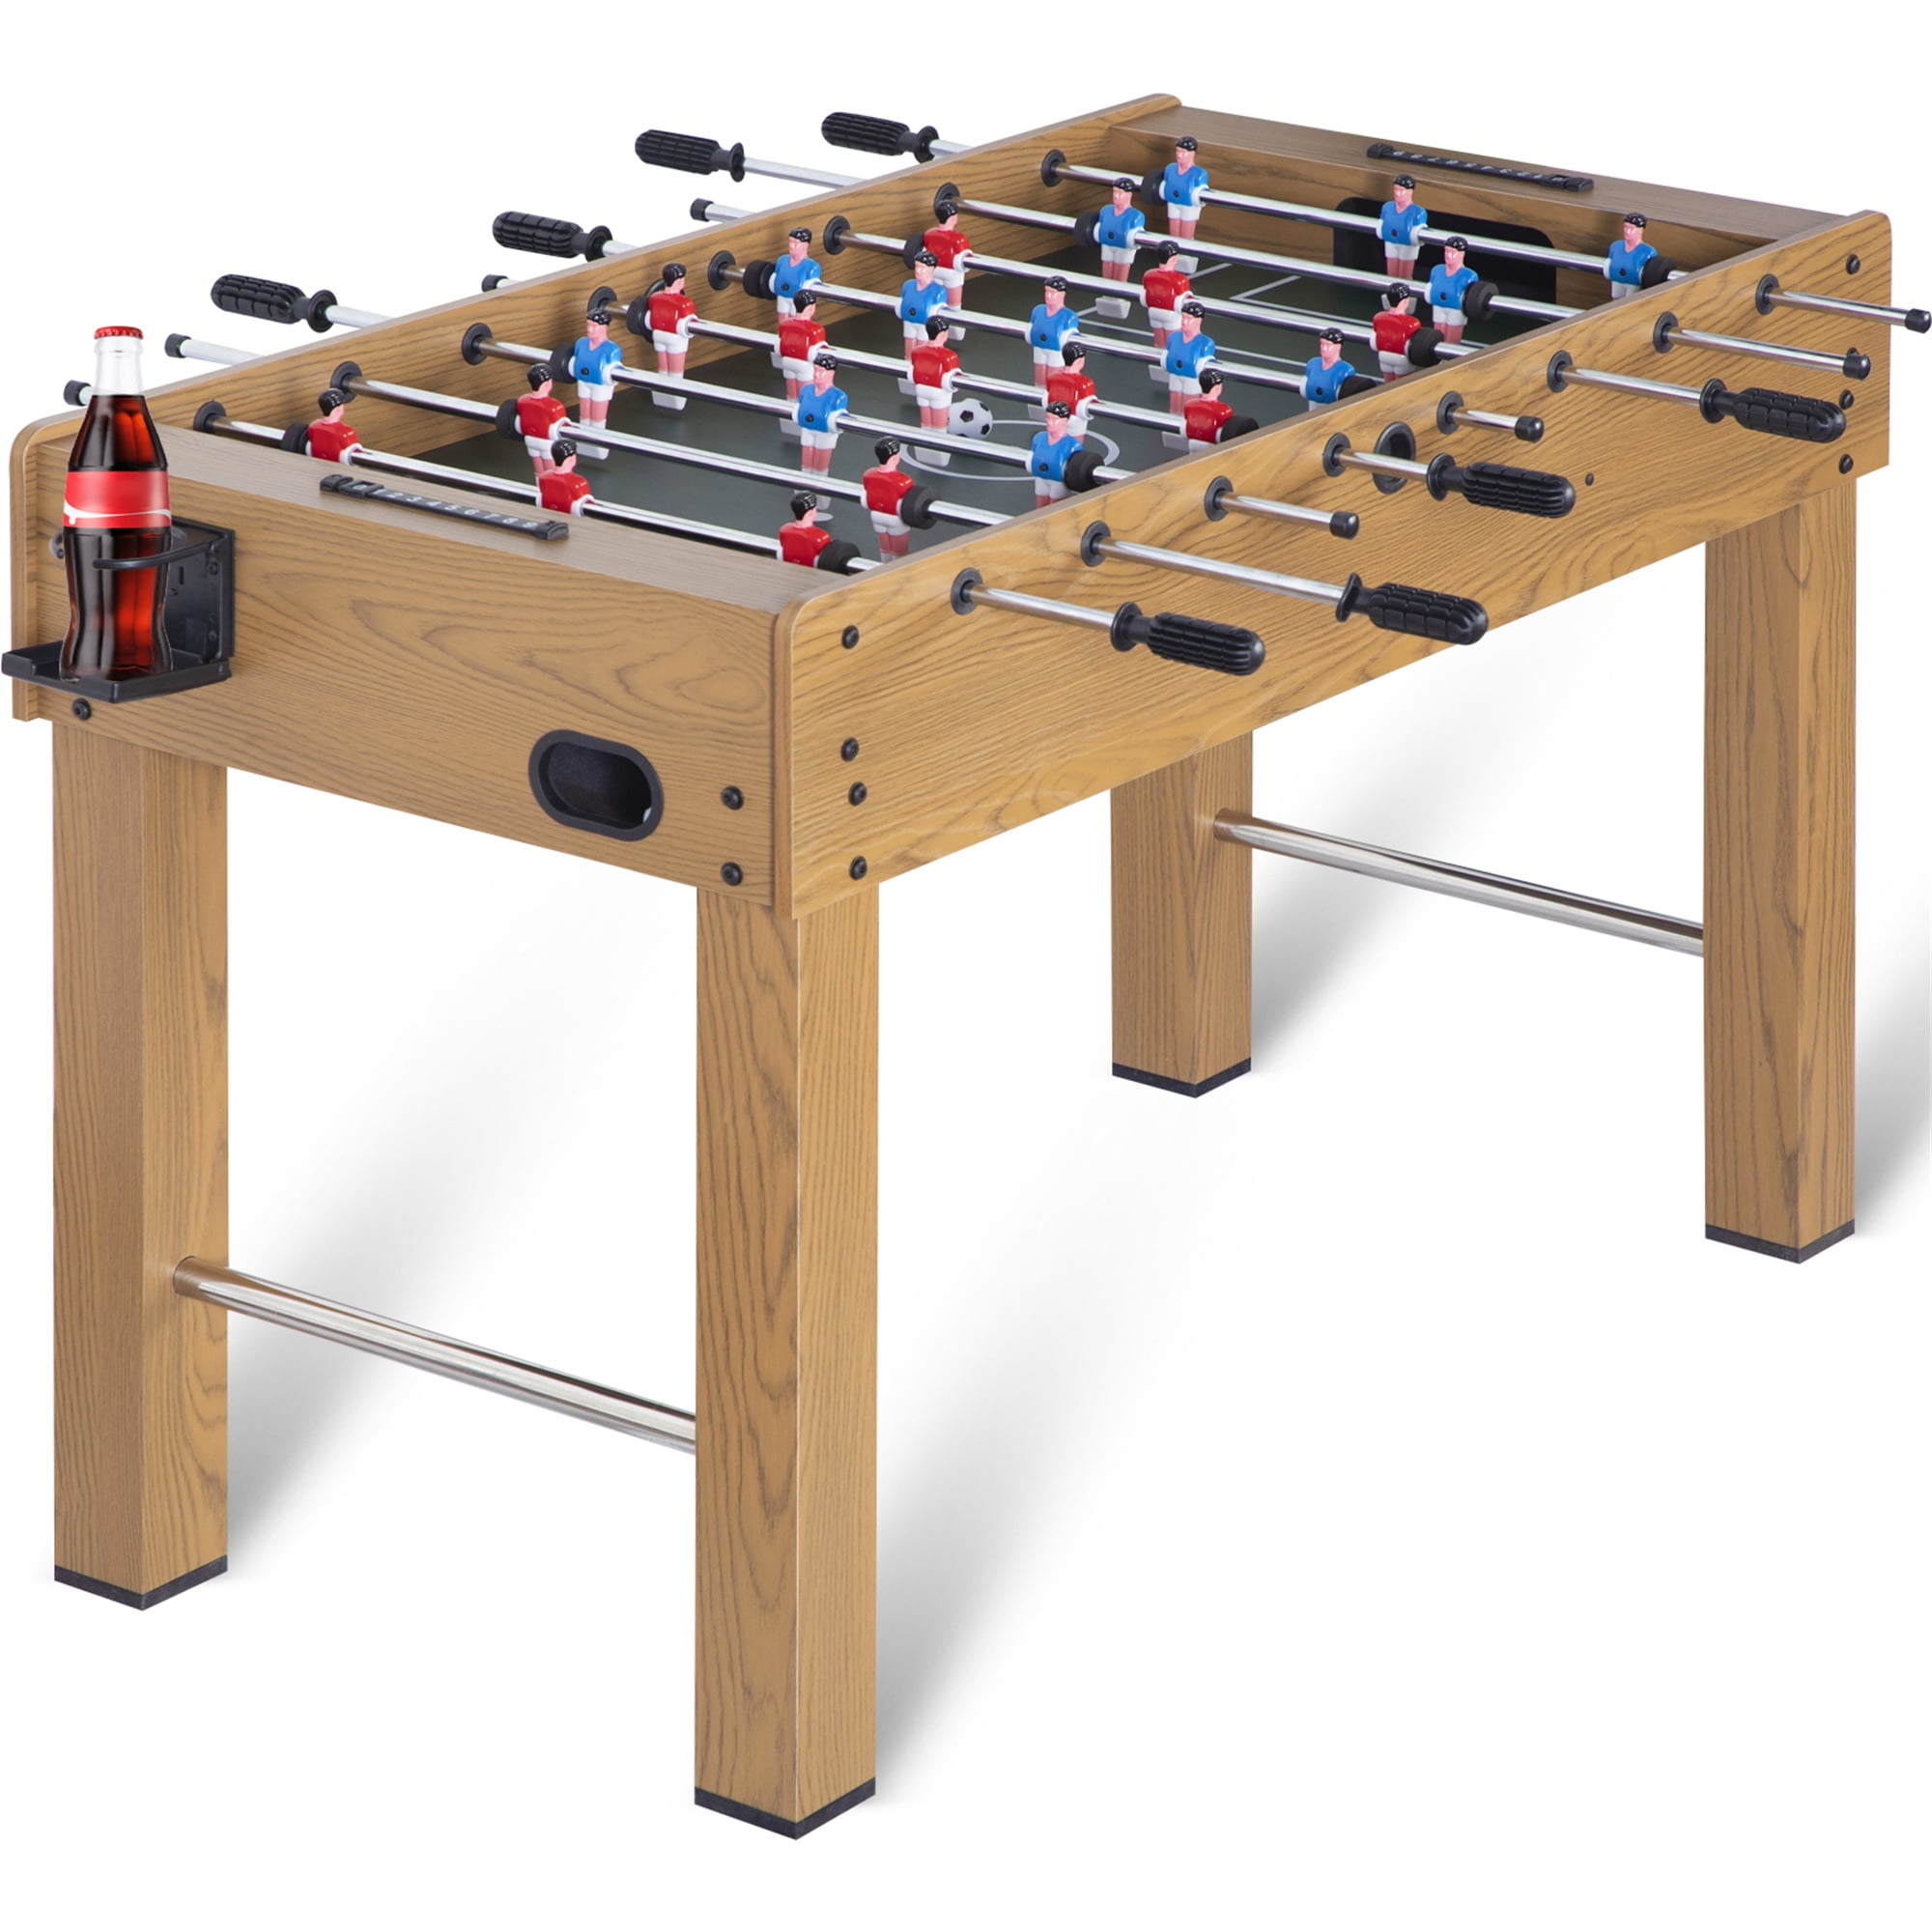 baby foot game table For Professional or Home Use 